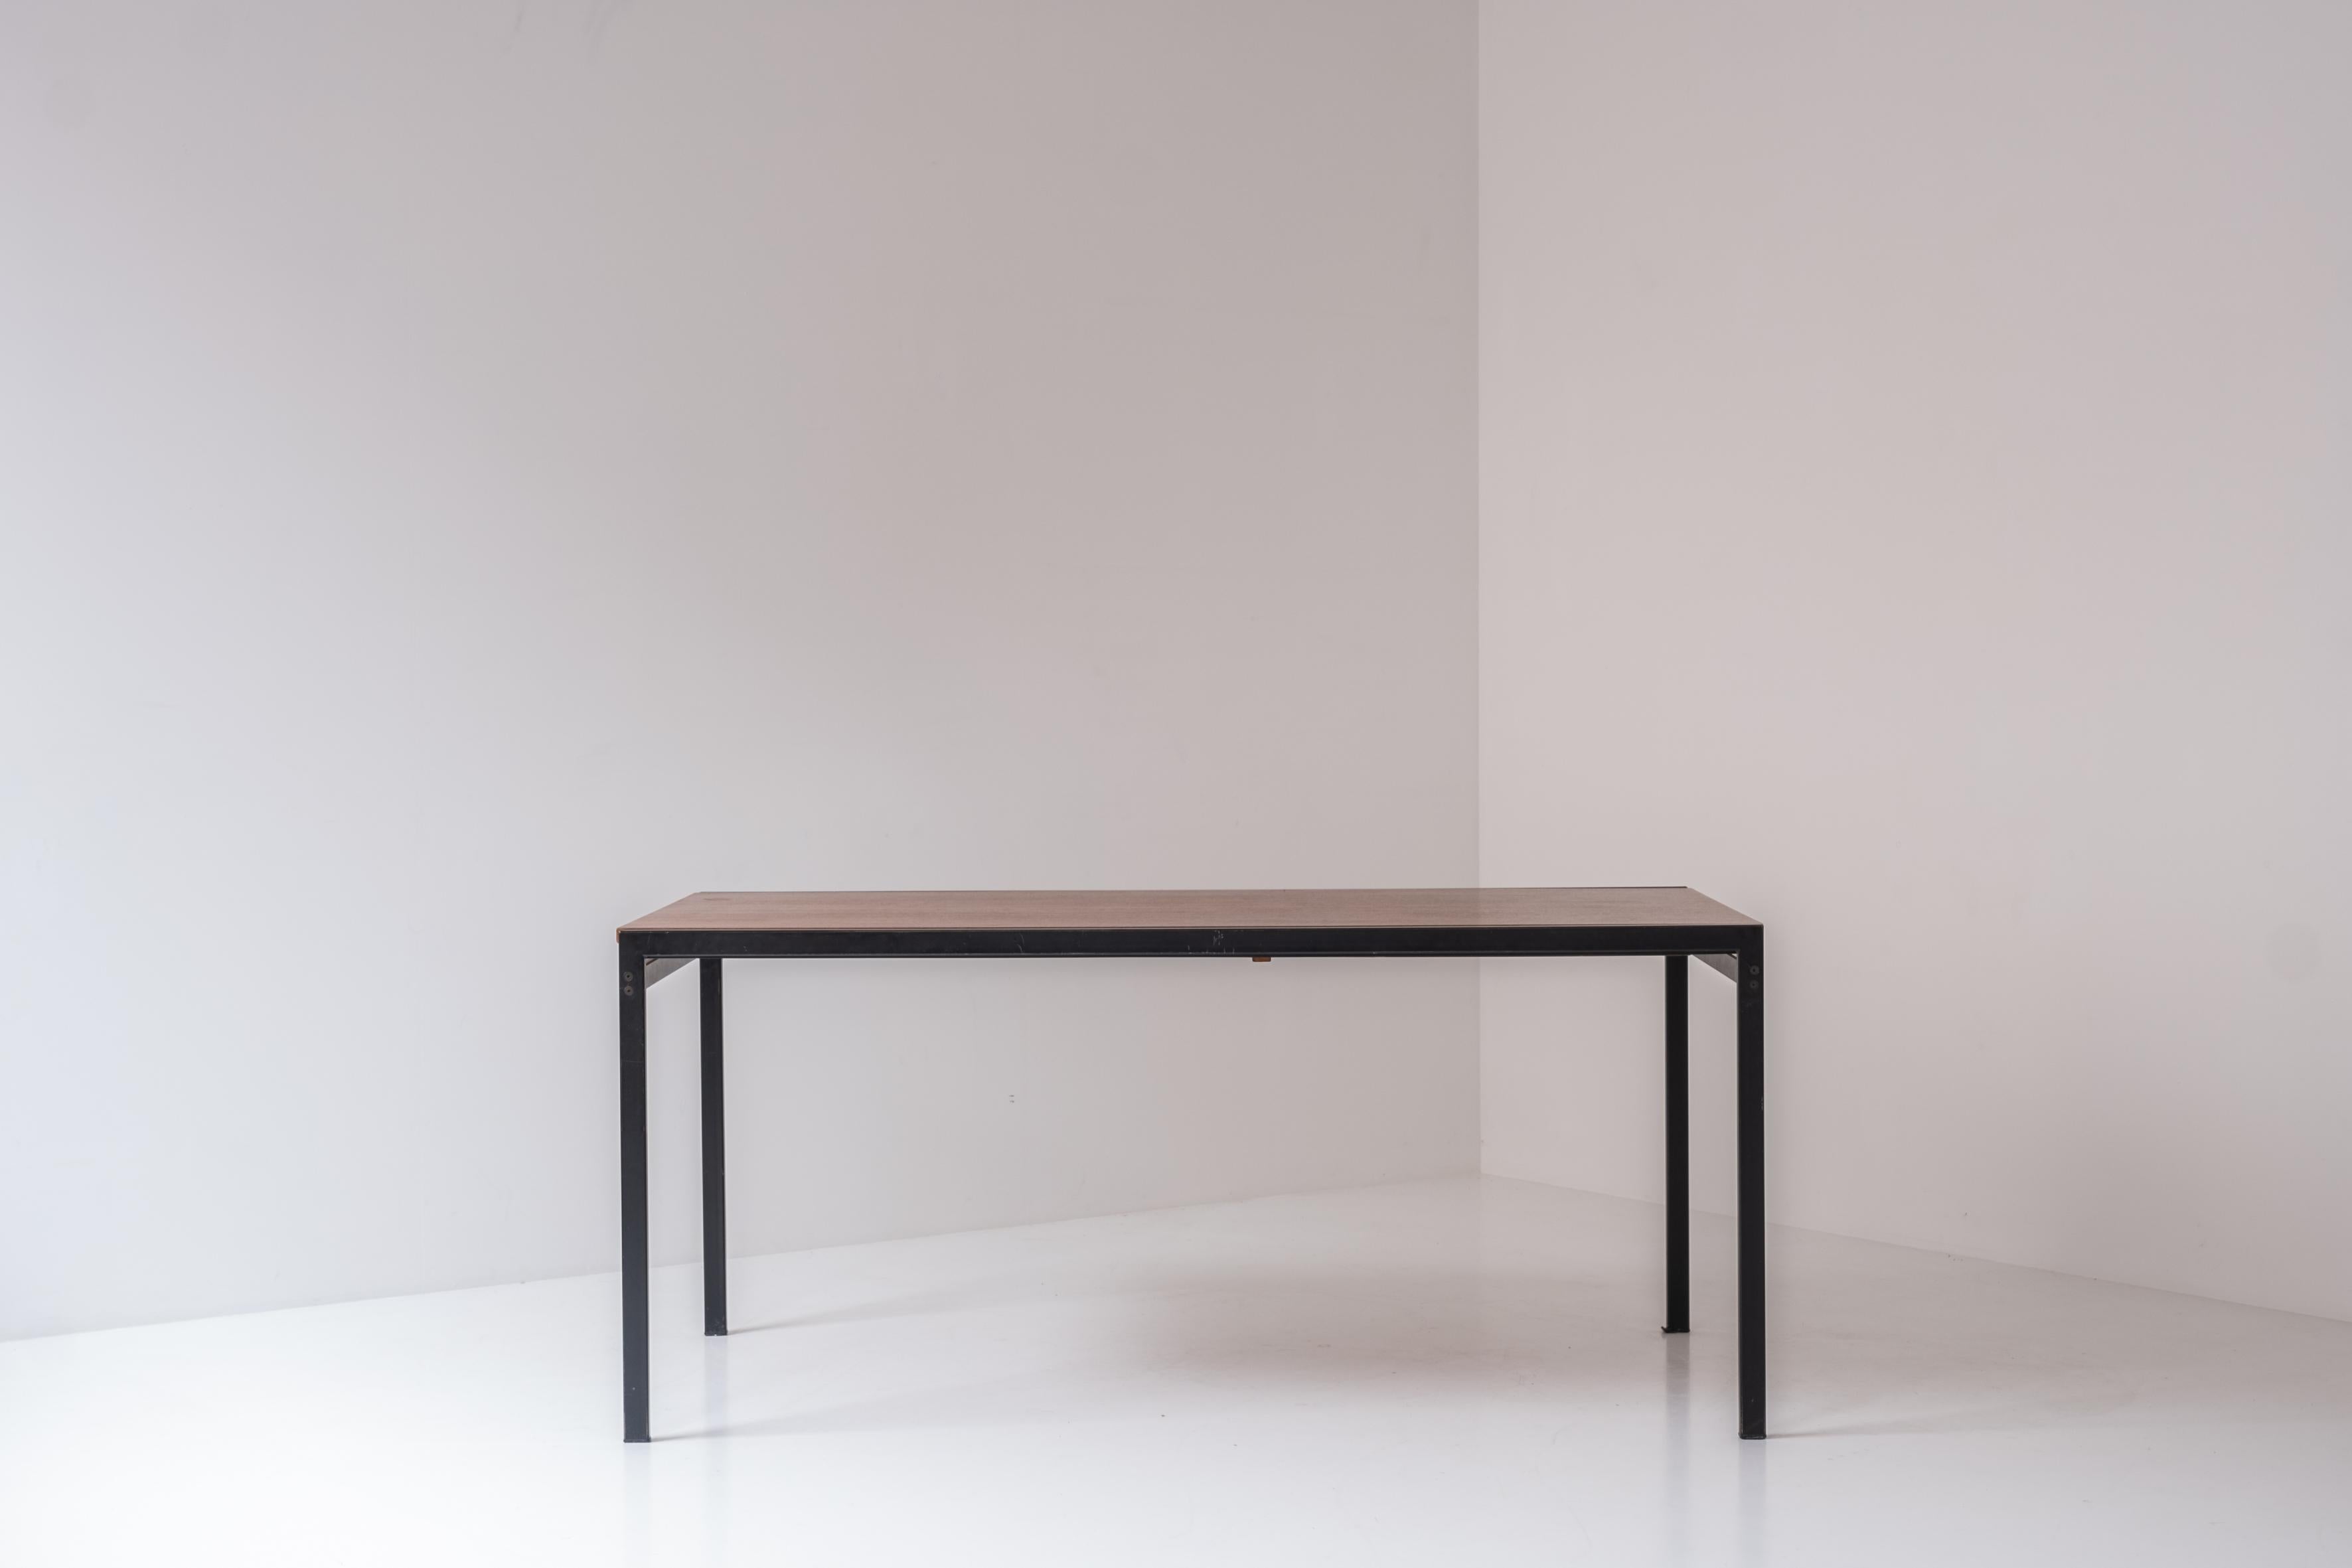 Dining table by Cees Braakman for Pastoe, The Netherlands 1960s. This table is model TU11 and is part of the Japanese series. The table features a black lacquered steel frame and a table top of teak veneer. Extendable with an extra leaf that folds